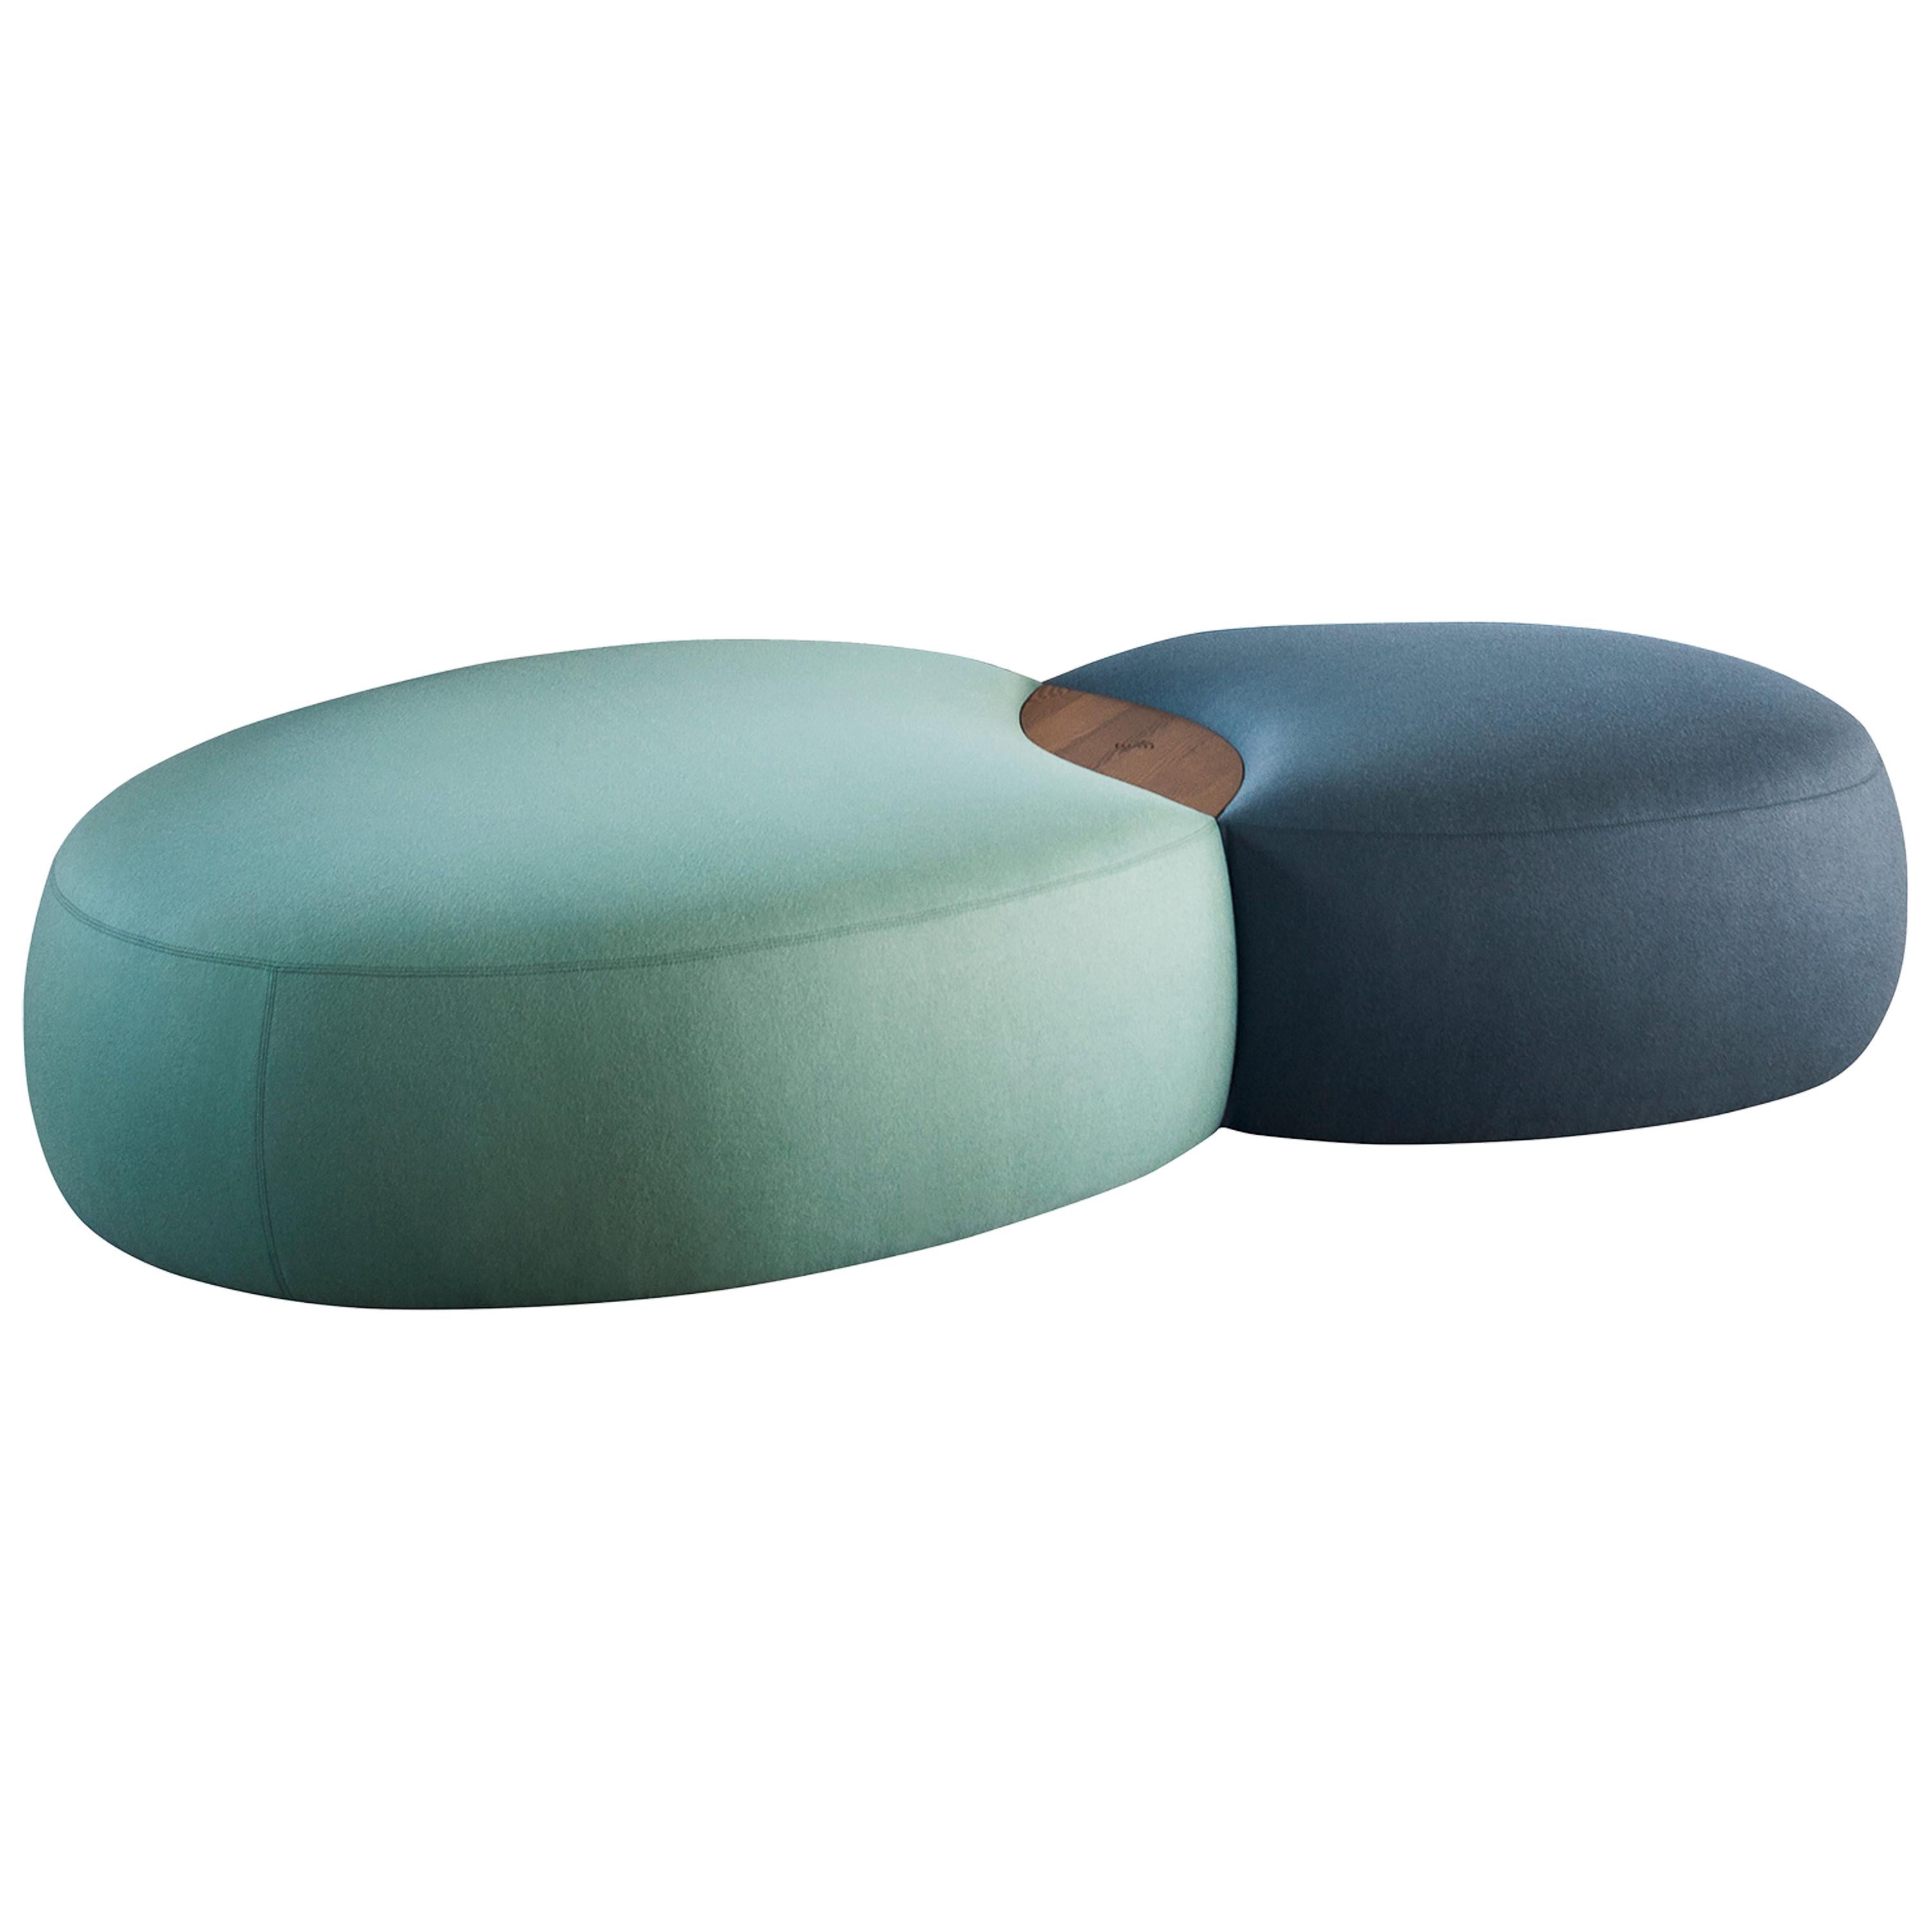 Tacchini Matera Ottoman in Calantha Fabric with Wood by Gordon Guillaumier For Sale